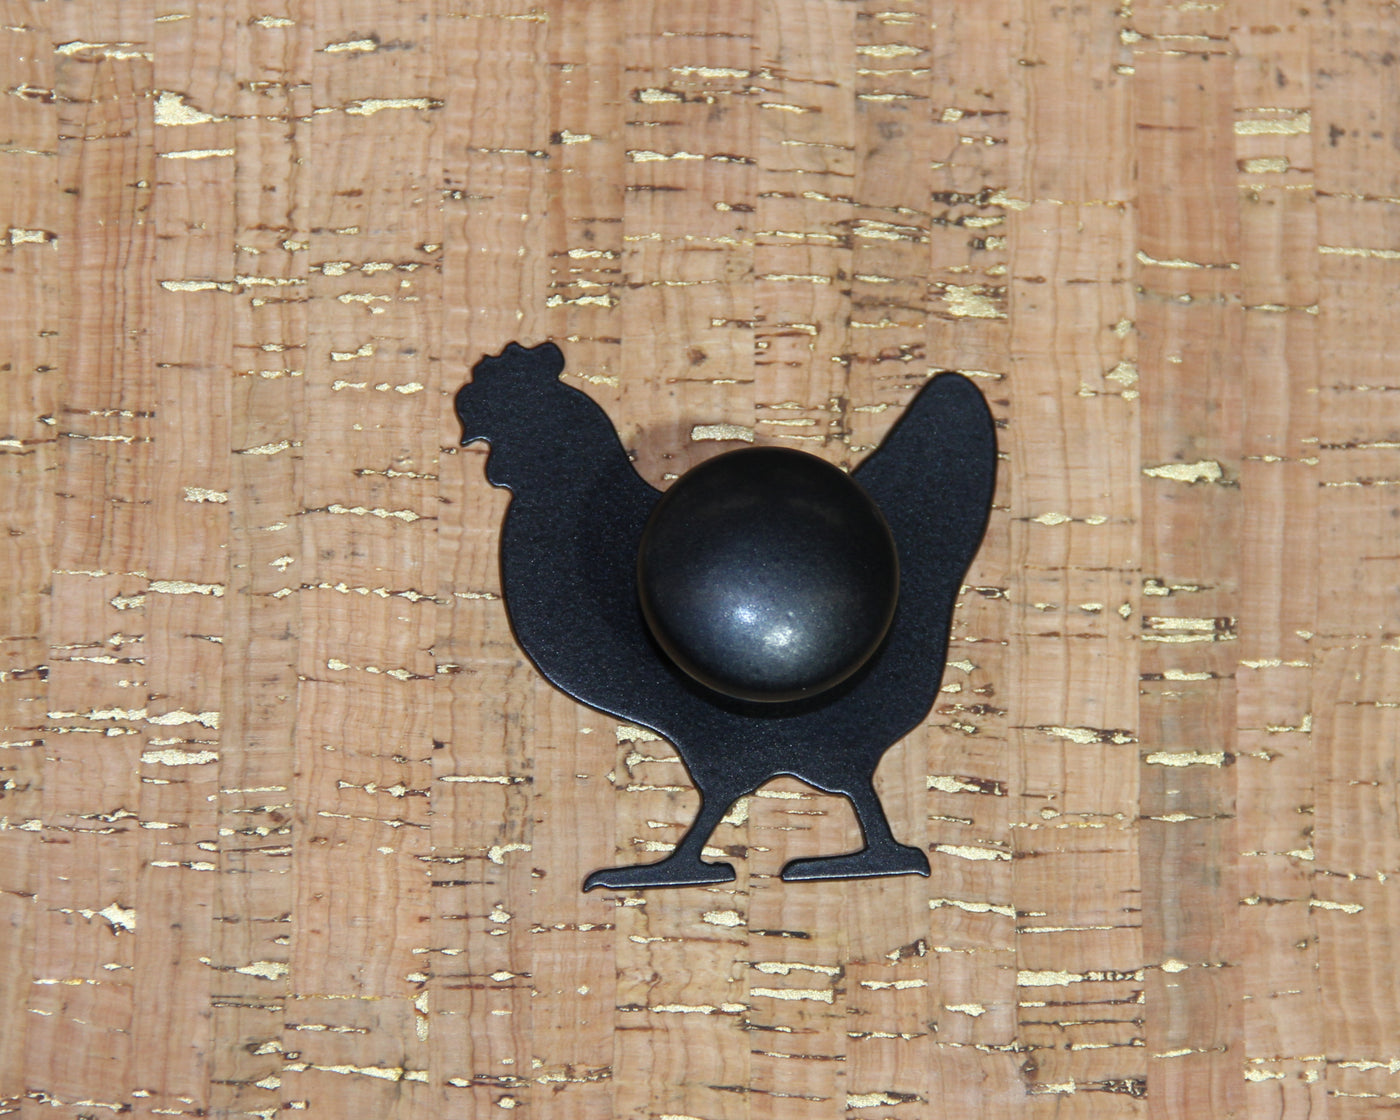 Chicken Cabinet Doorknob Decoration - Madison Iron and Wood - Door Handle Decoration - metal outdoor decor - Steel deocrations - american made products - veteran owned business products - fencing decorations - fencing supplies - custom wall decorations - personalized wall signs - steel - decorative post caps - steel post caps - metal post caps - brackets - structural brackets - home improvement - easter - easter decorations - easter gift - easter yard decor